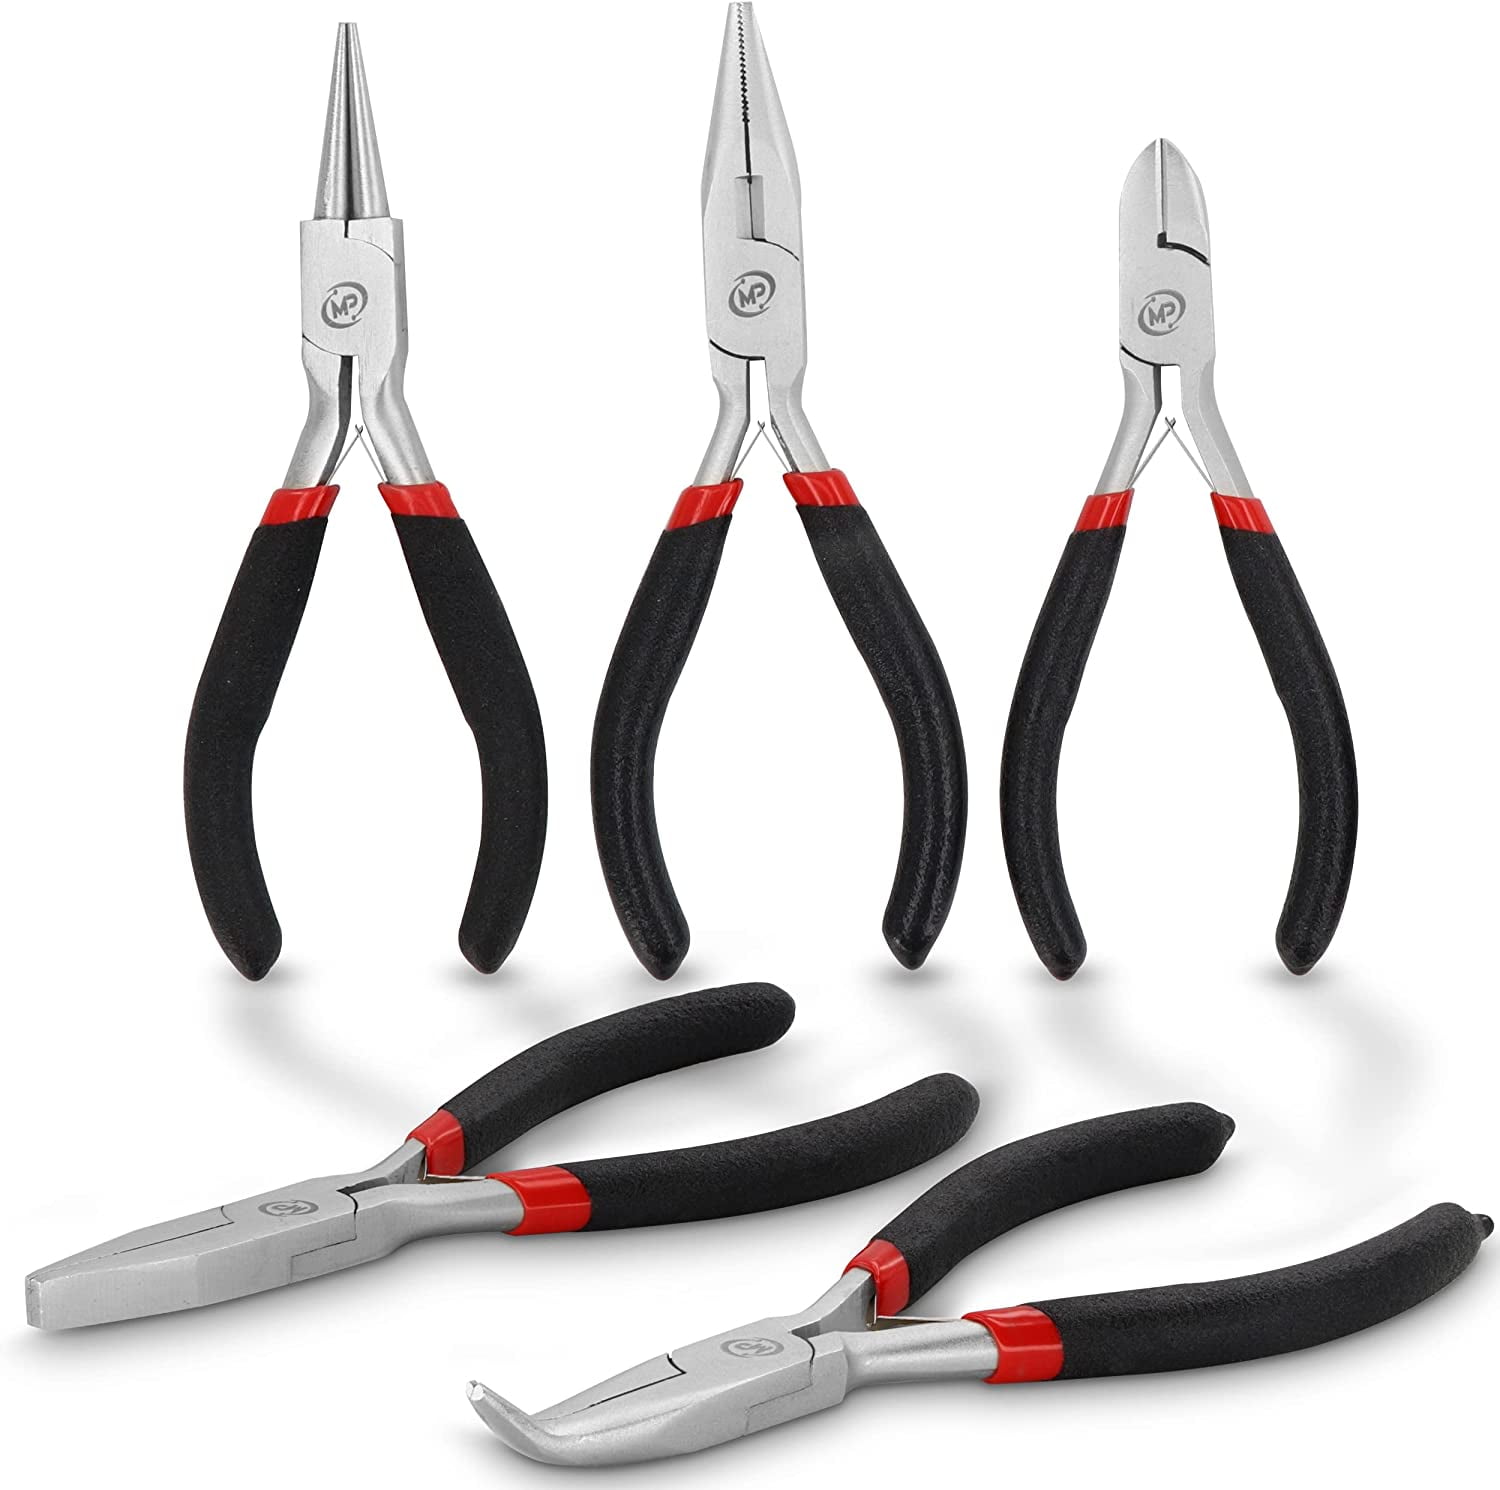 Needle Nose Pliers for DIY Crafts - Uncorked Canvas